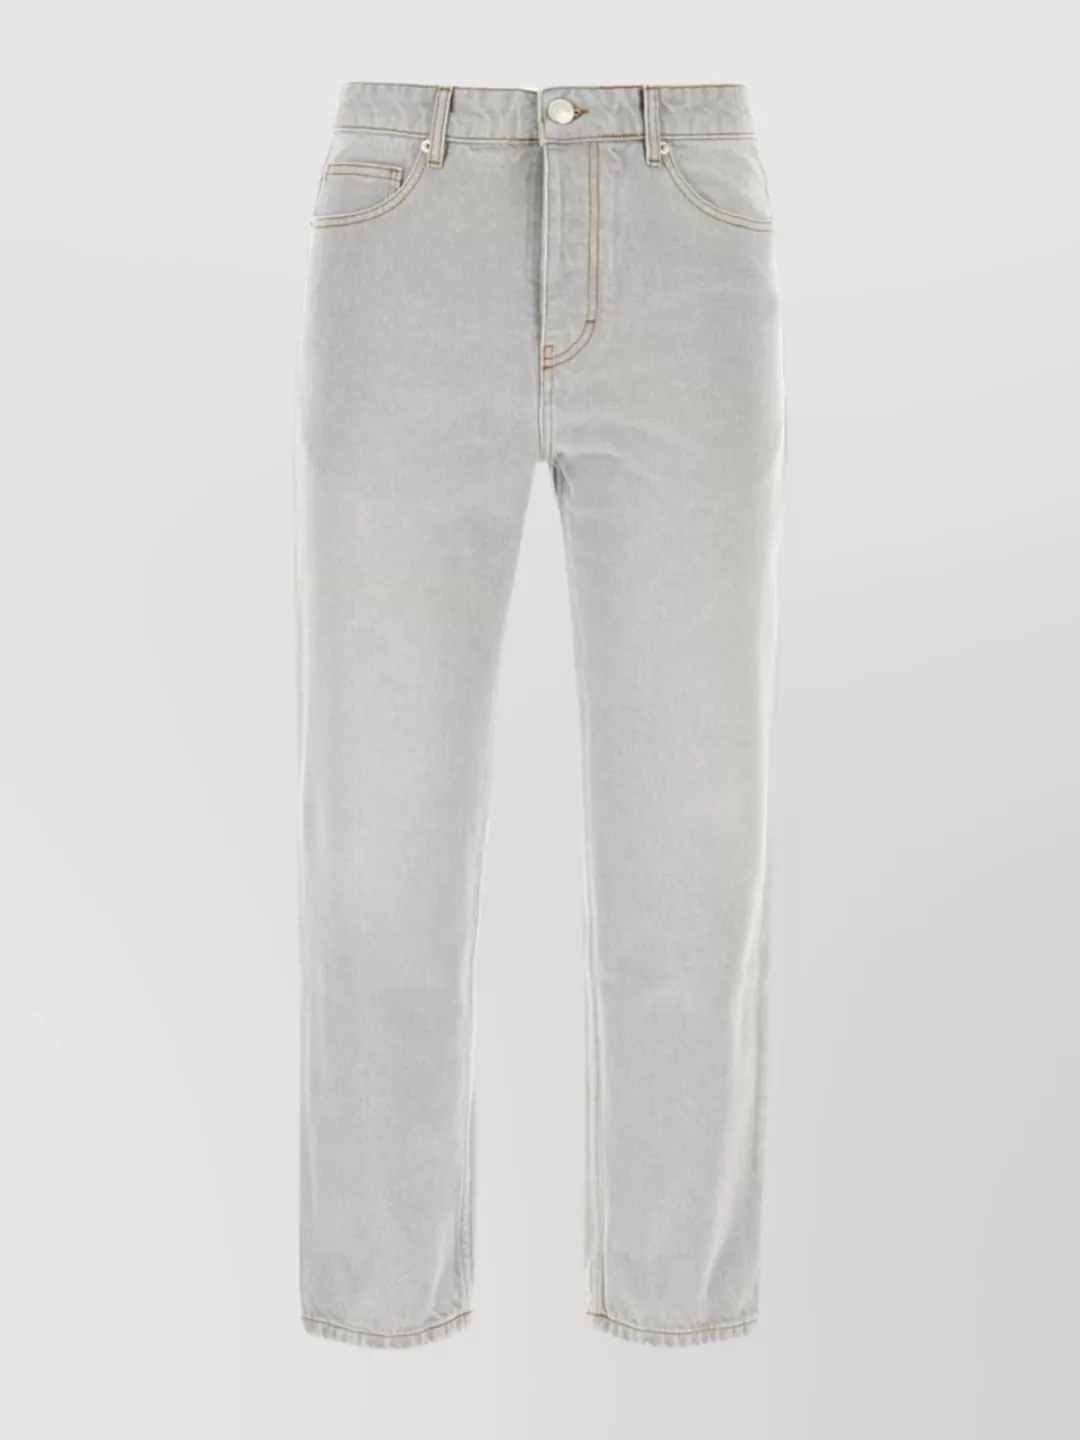 Ami Alexandre Mattiussi Denim Jeans Cropped Length Contrast Stitching In Gray